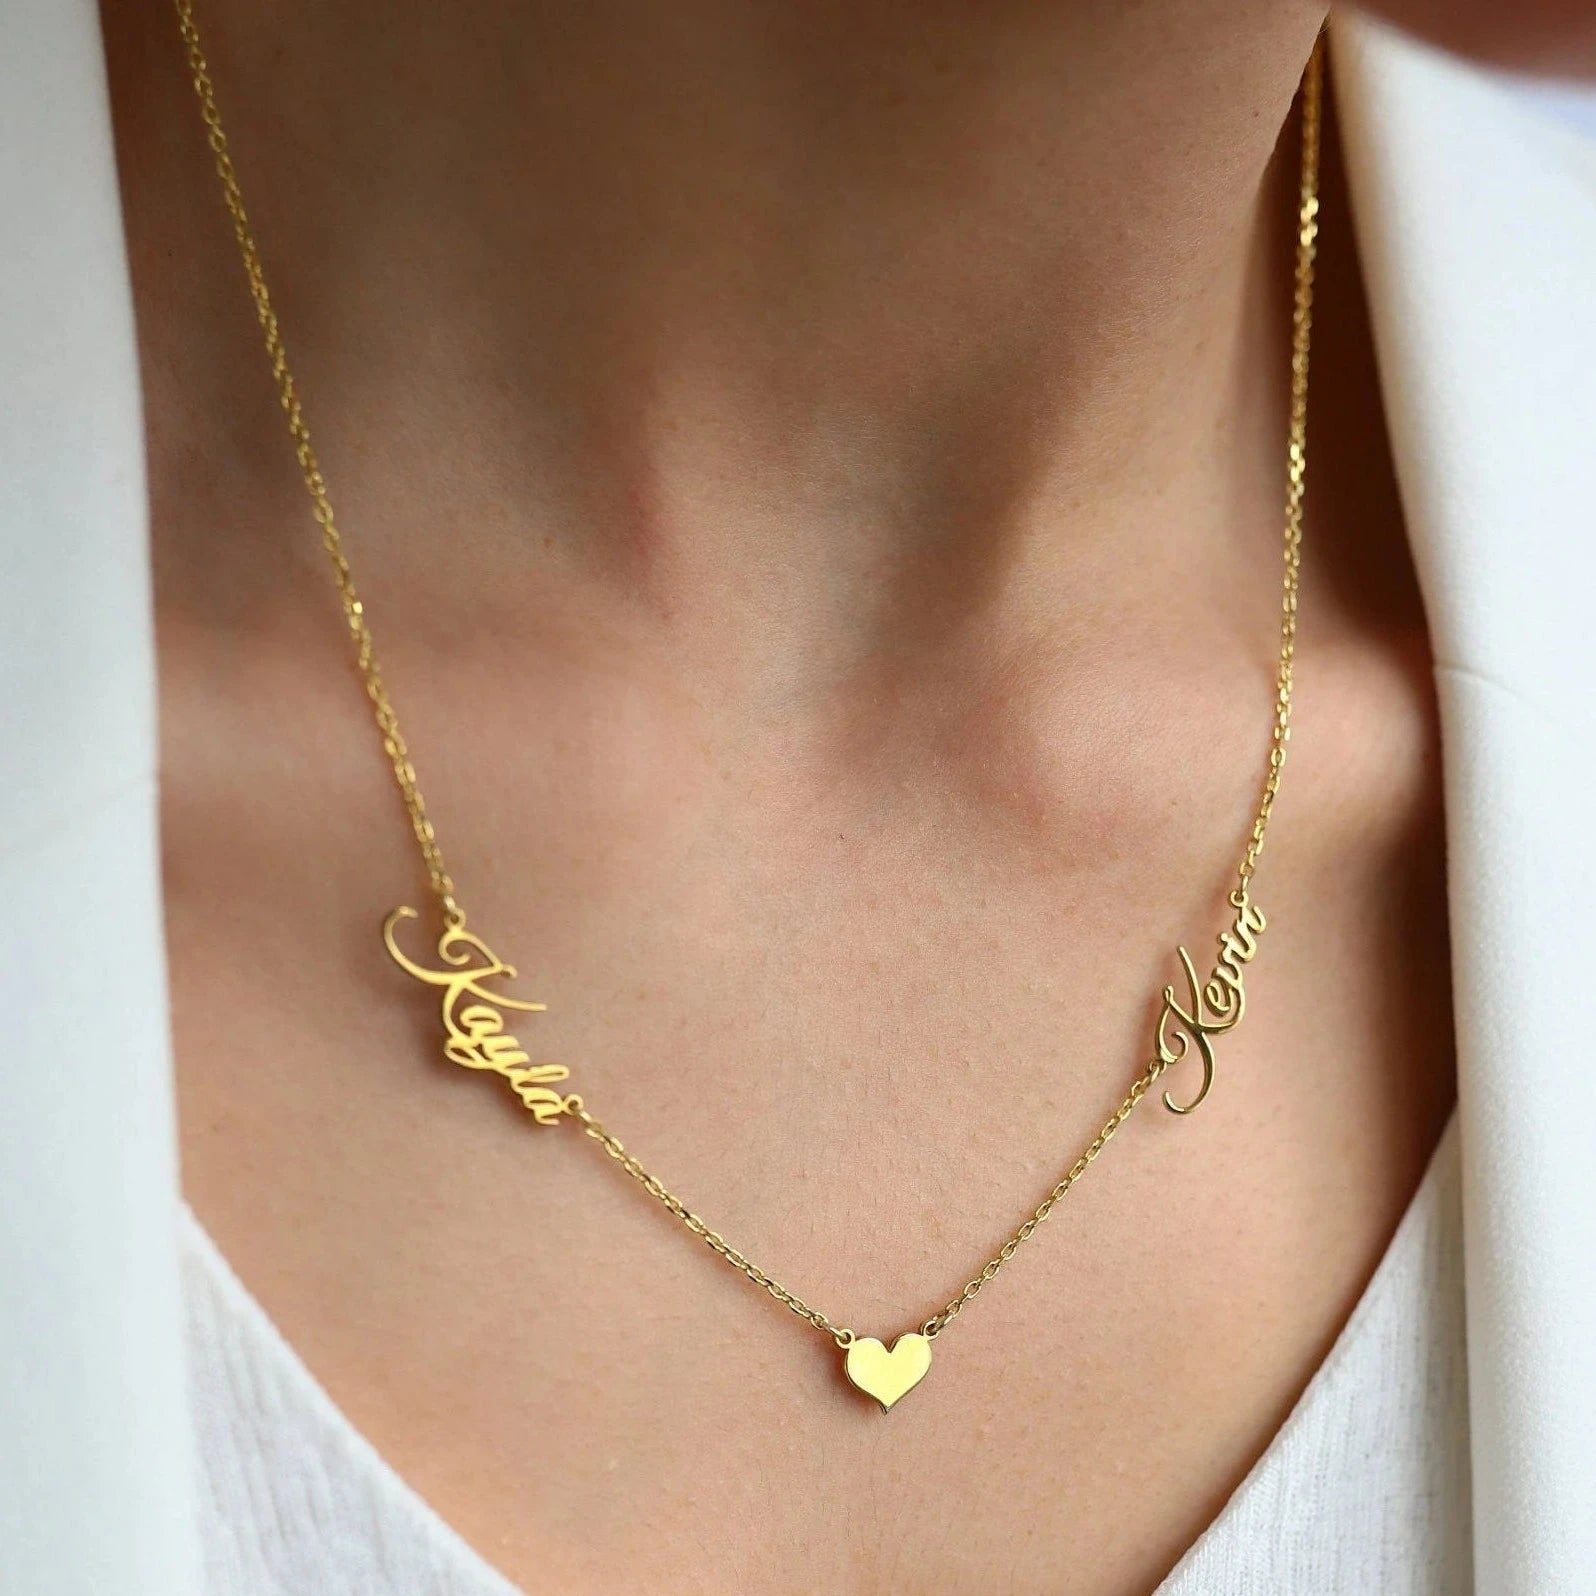 Gold Heart Necklace for Couples - Stylish and Timeless Design